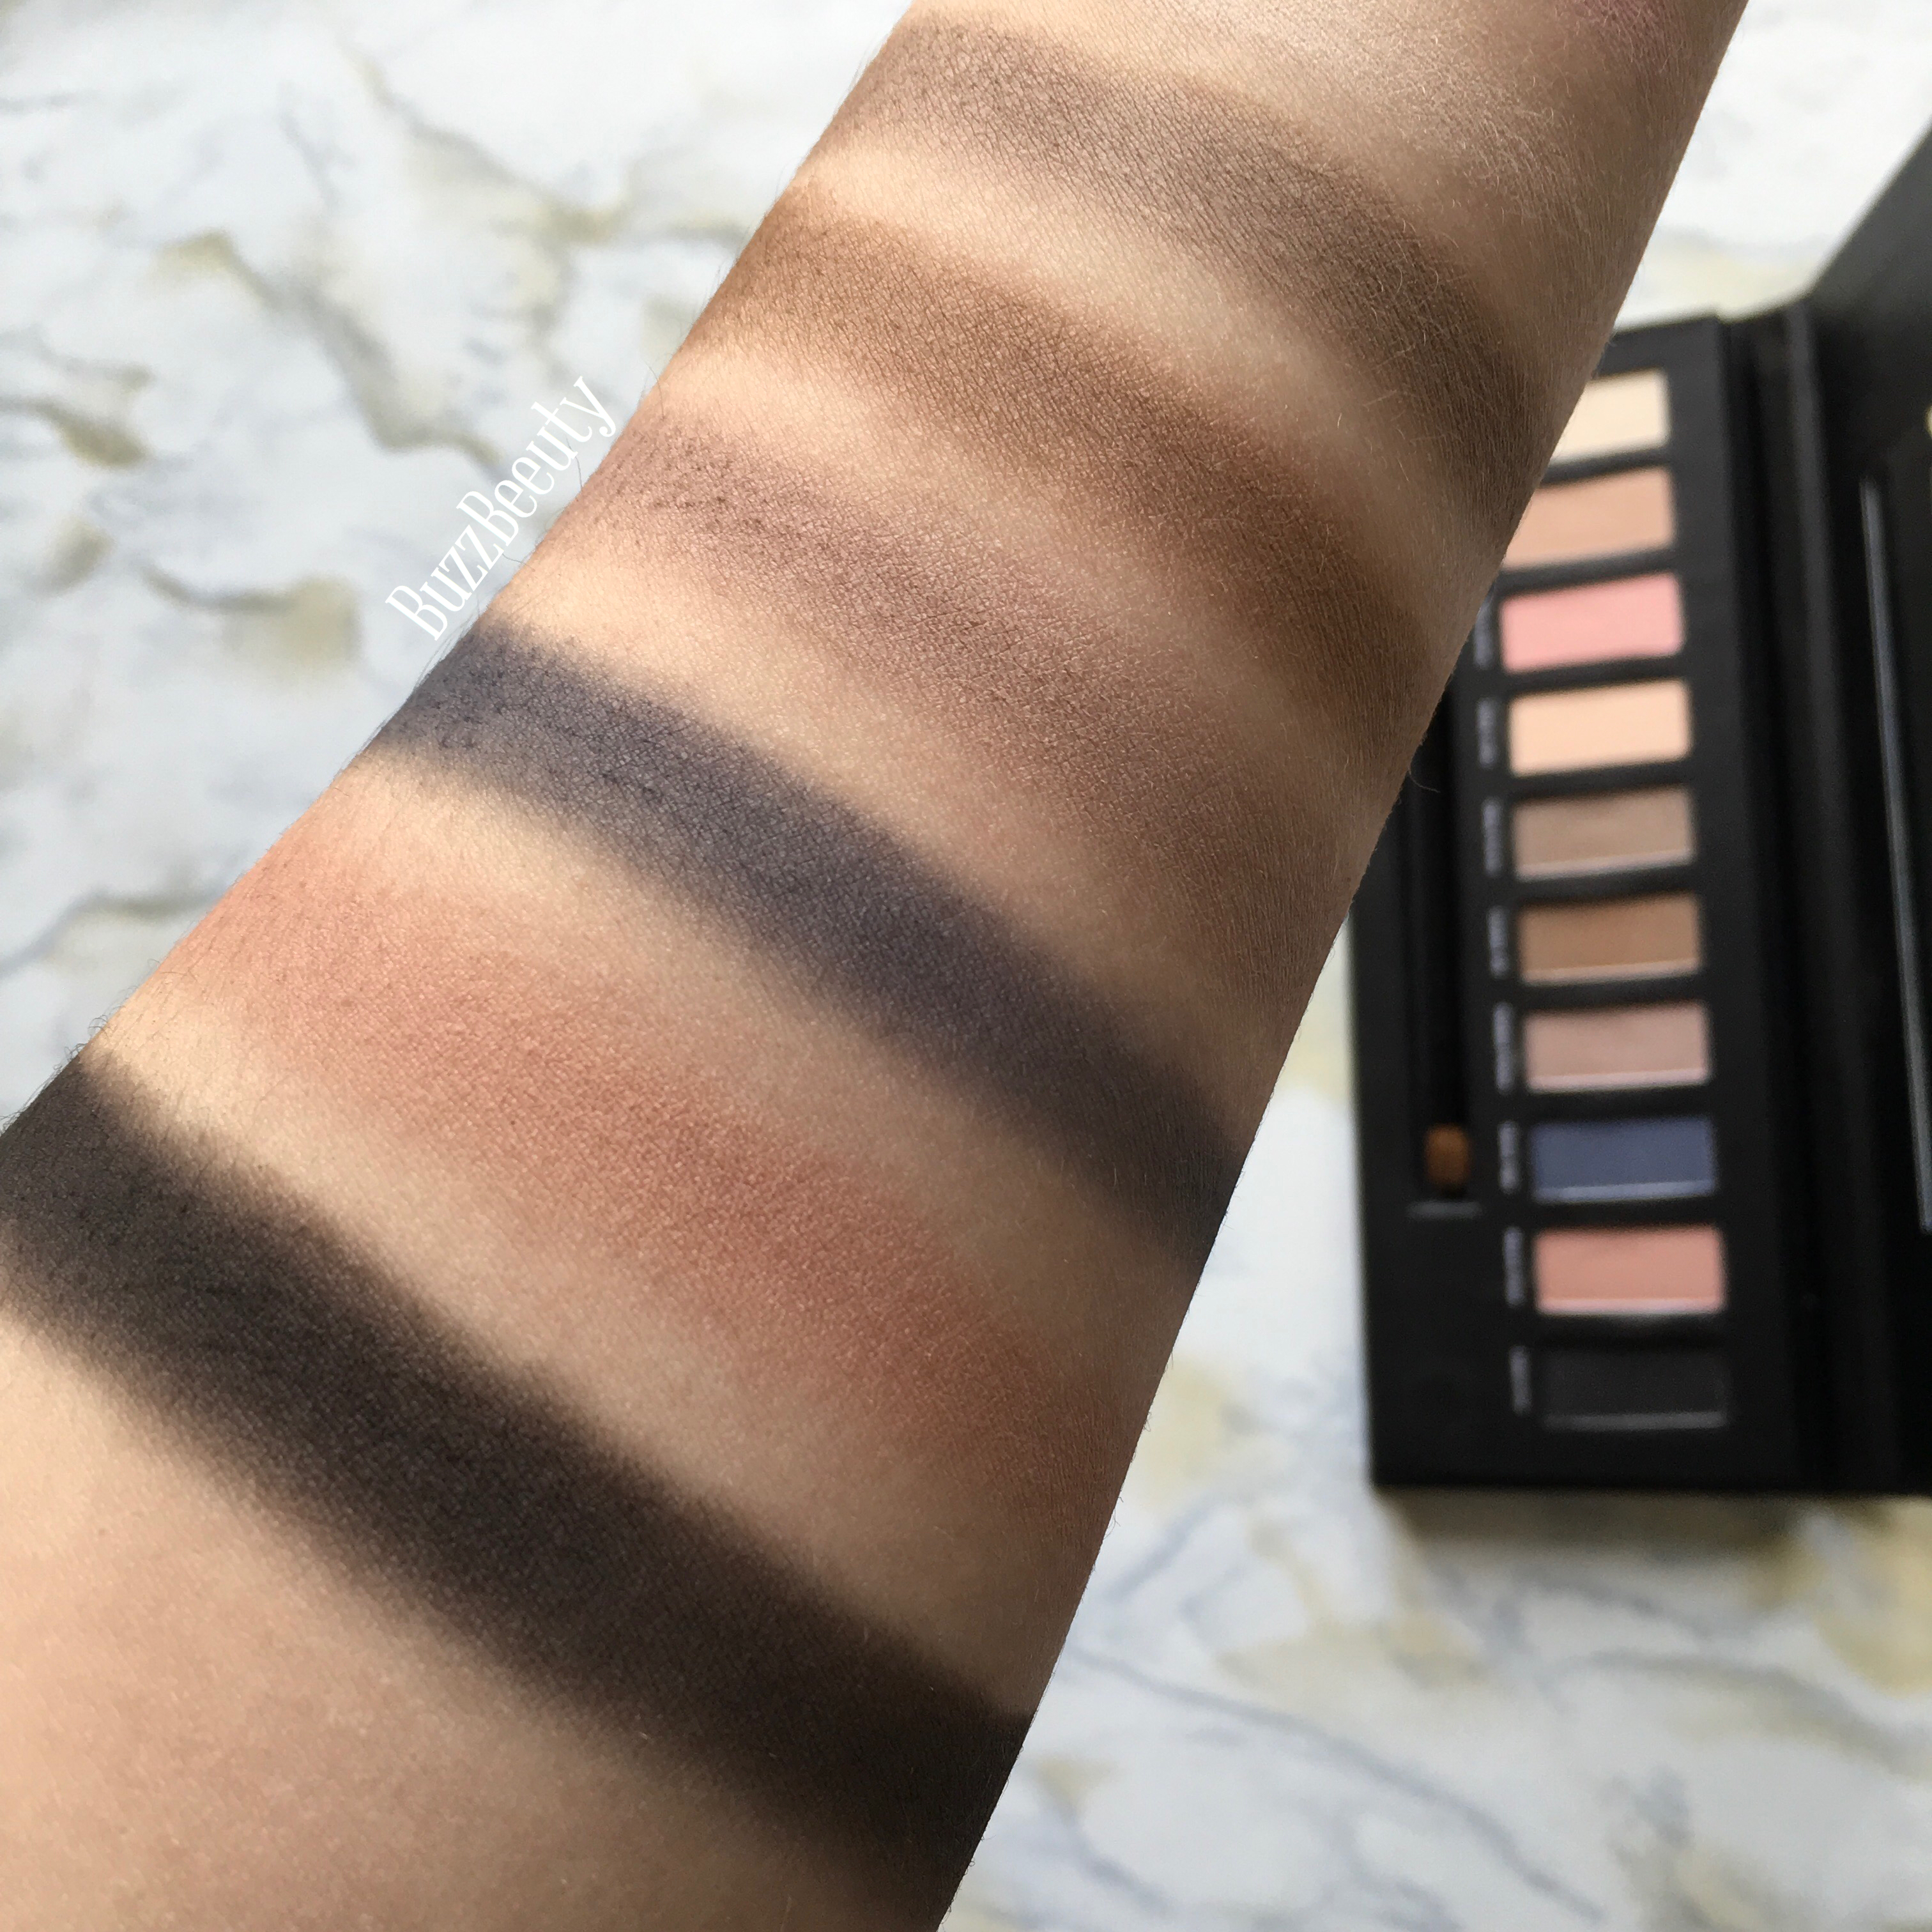 Soap & Glory The Ultimatte Collection Palette swatches